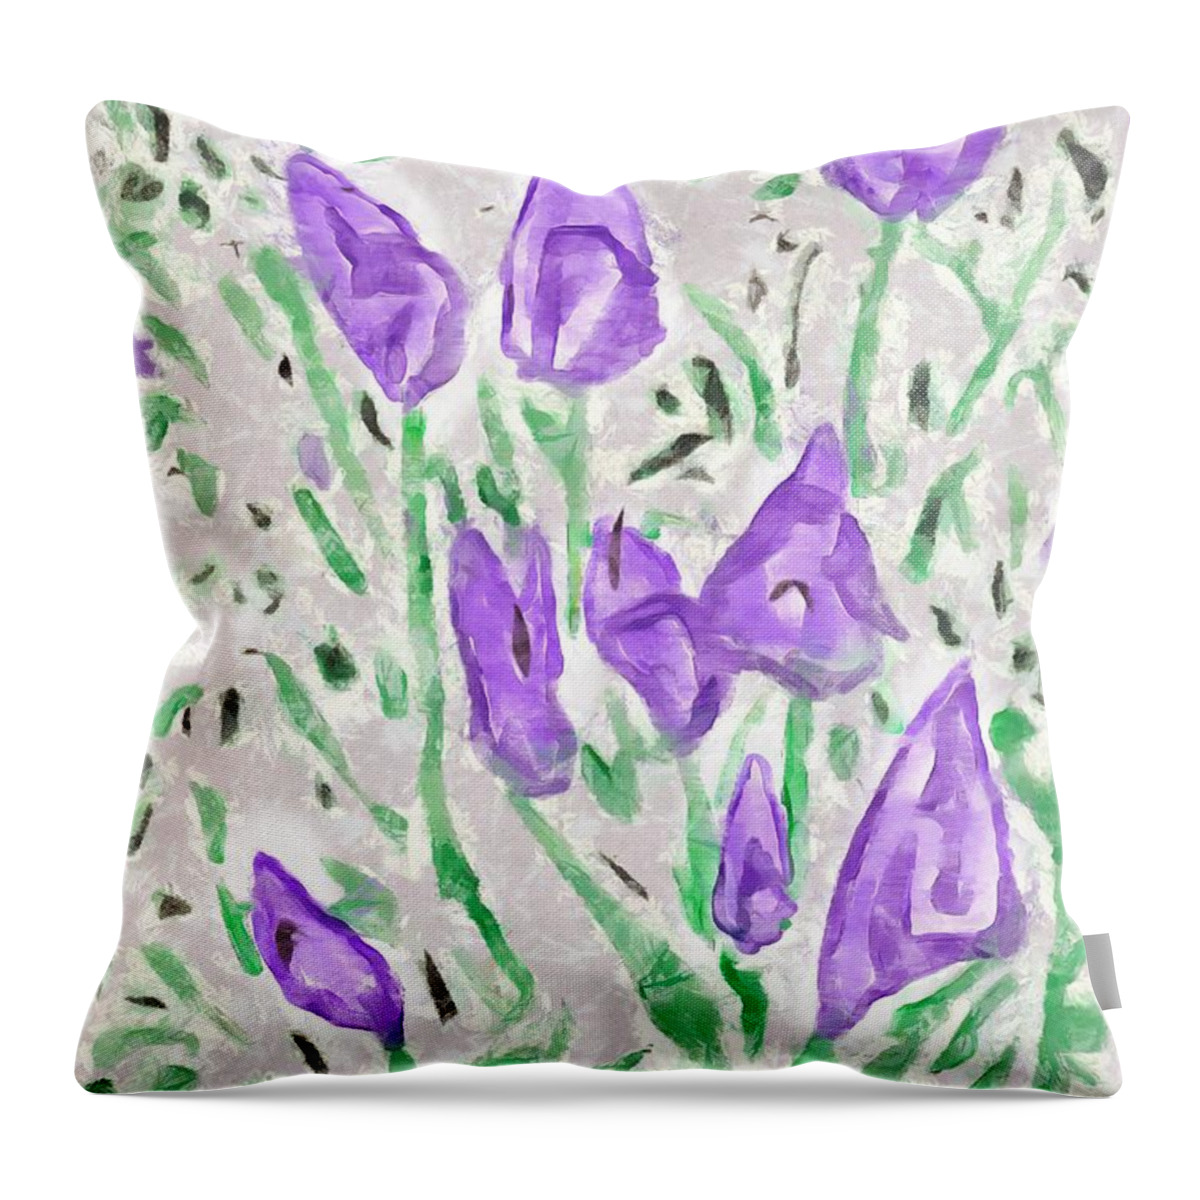 Tulips Throw Pillow featuring the mixed media Minimalist Tulips by Christopher Reed